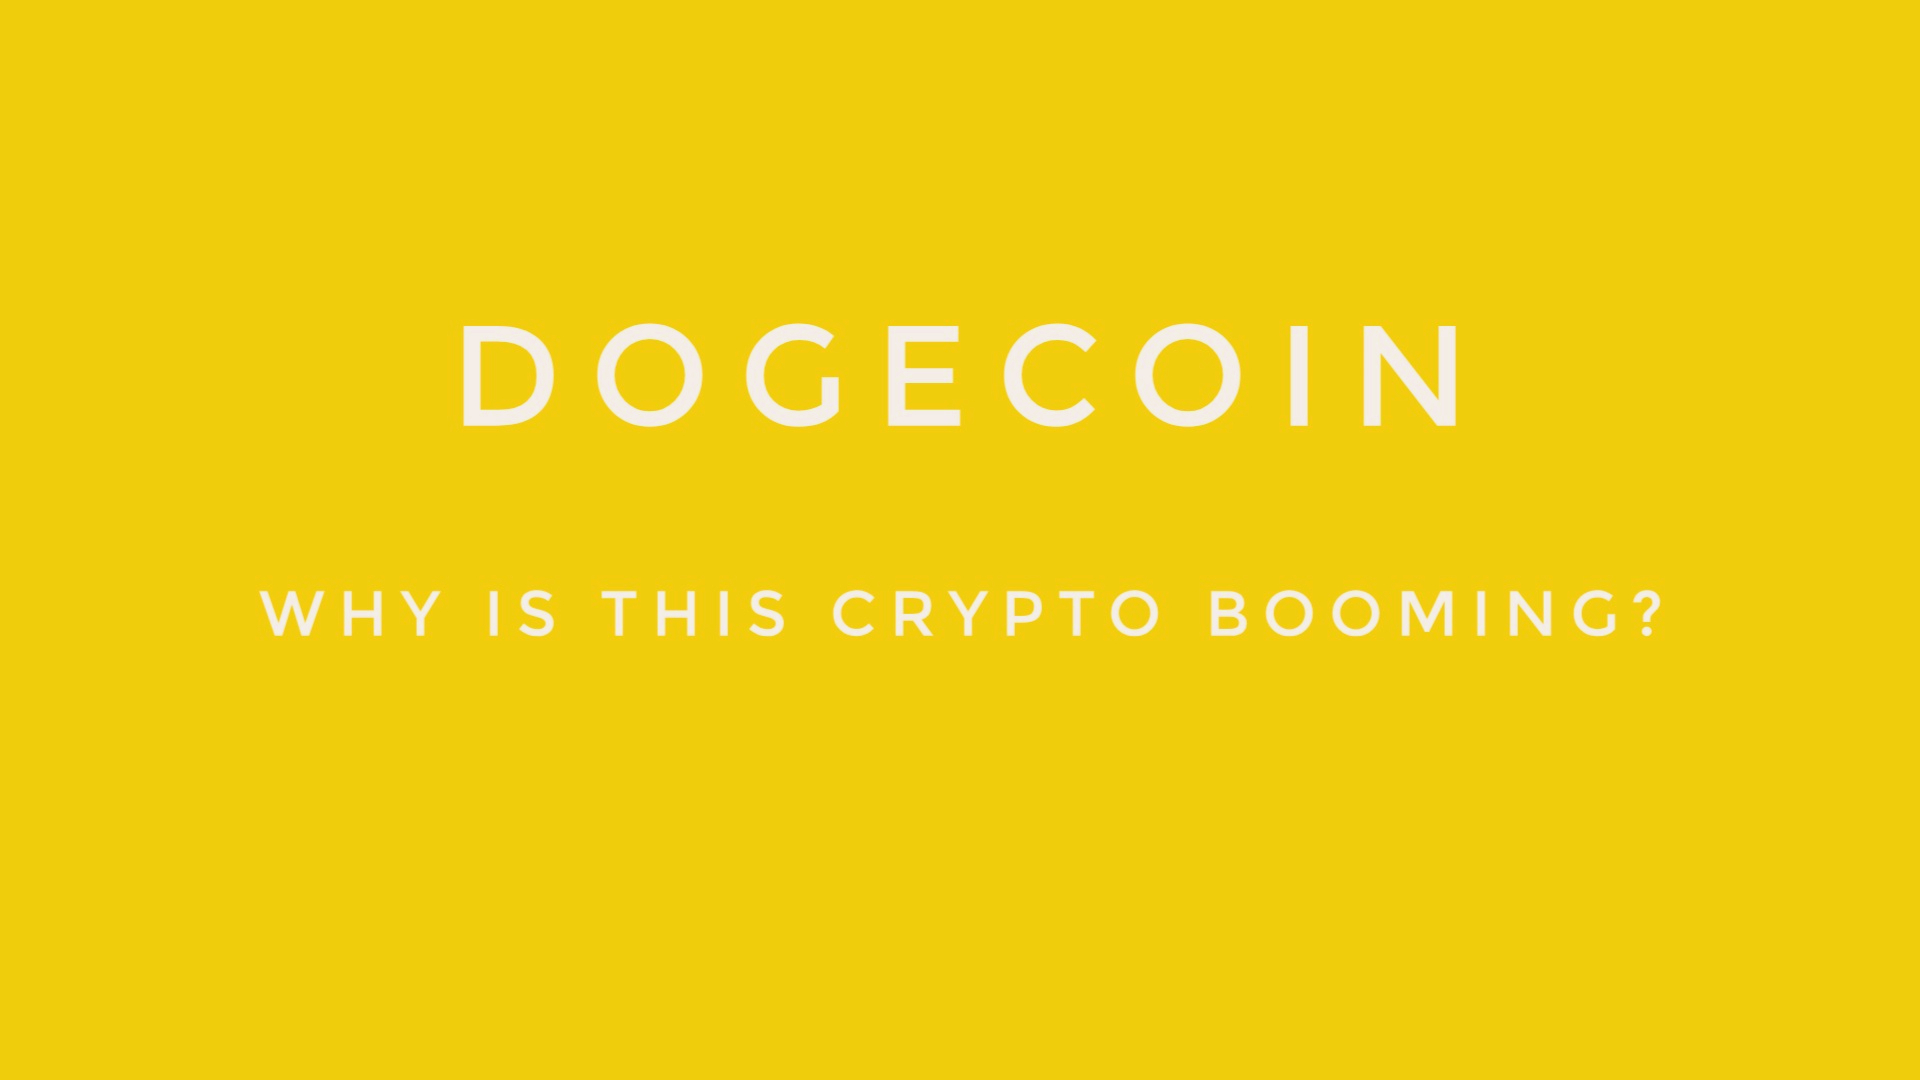 Top 4 Reasons Why Dogecoin is BOOMING - CryptoTicker